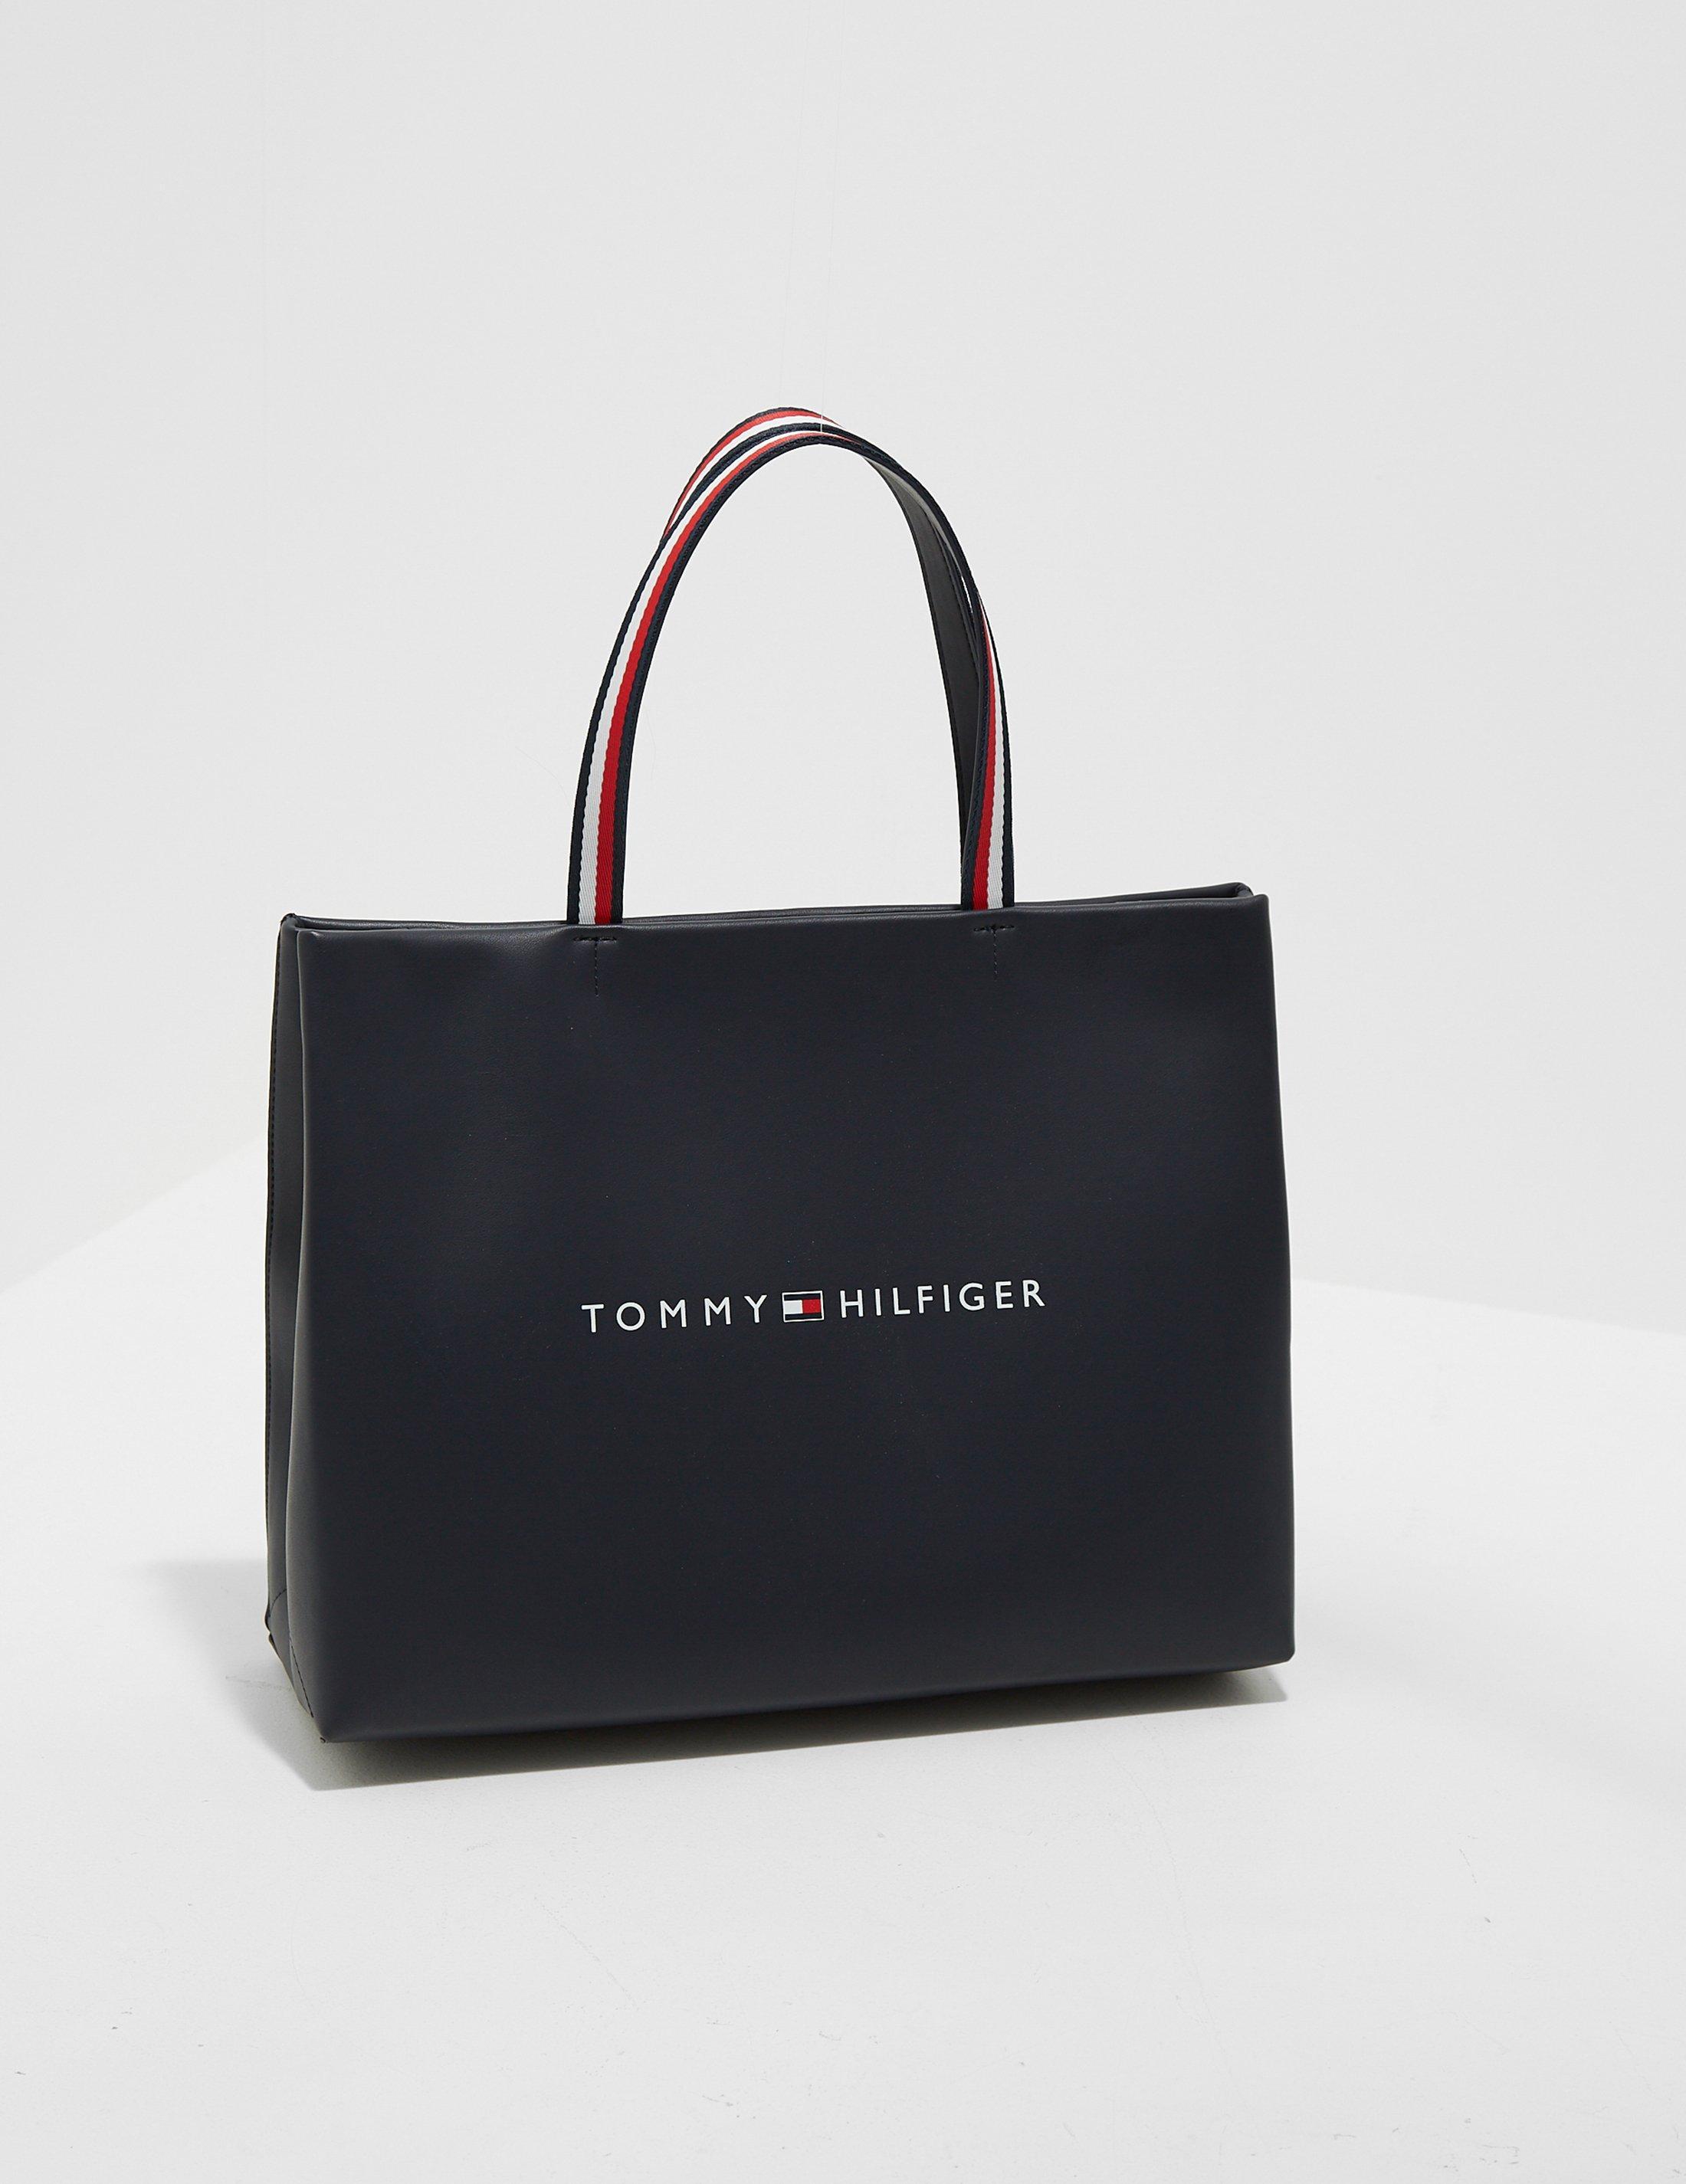 Buy > shopping tommy hilfiger > in stock